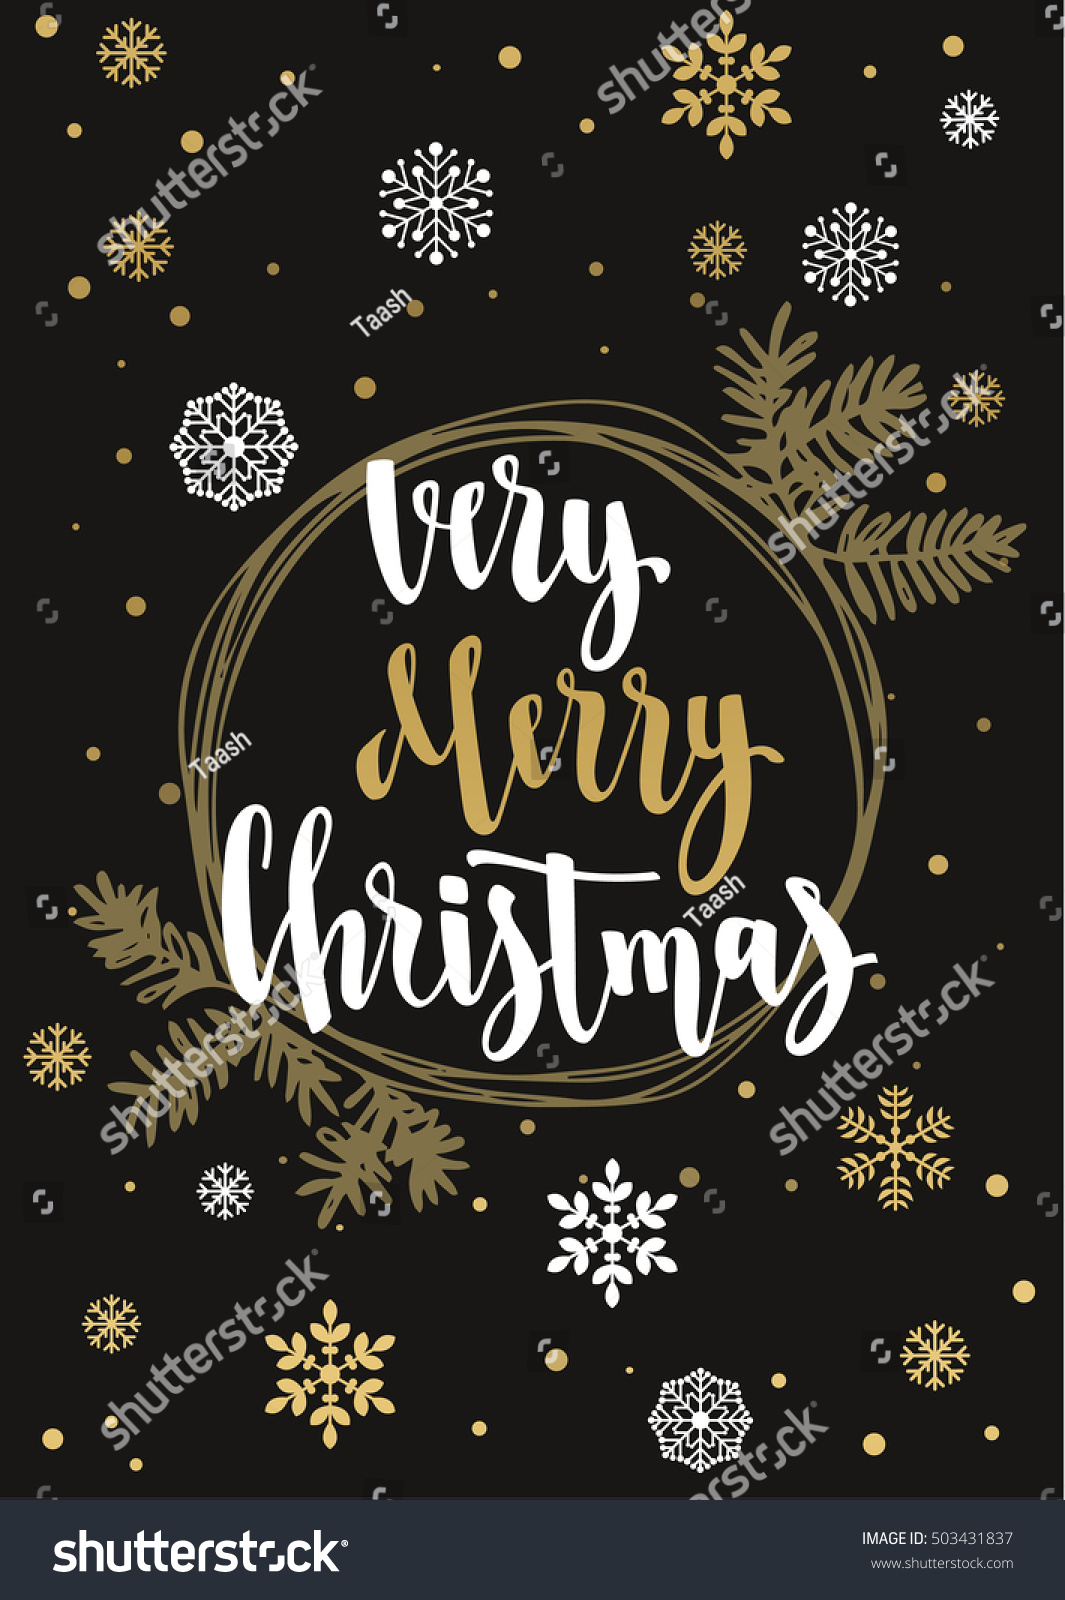 Very Merry Christmas Holiday greeting card with calligraphy and decorative elements Handwritten modern lettering